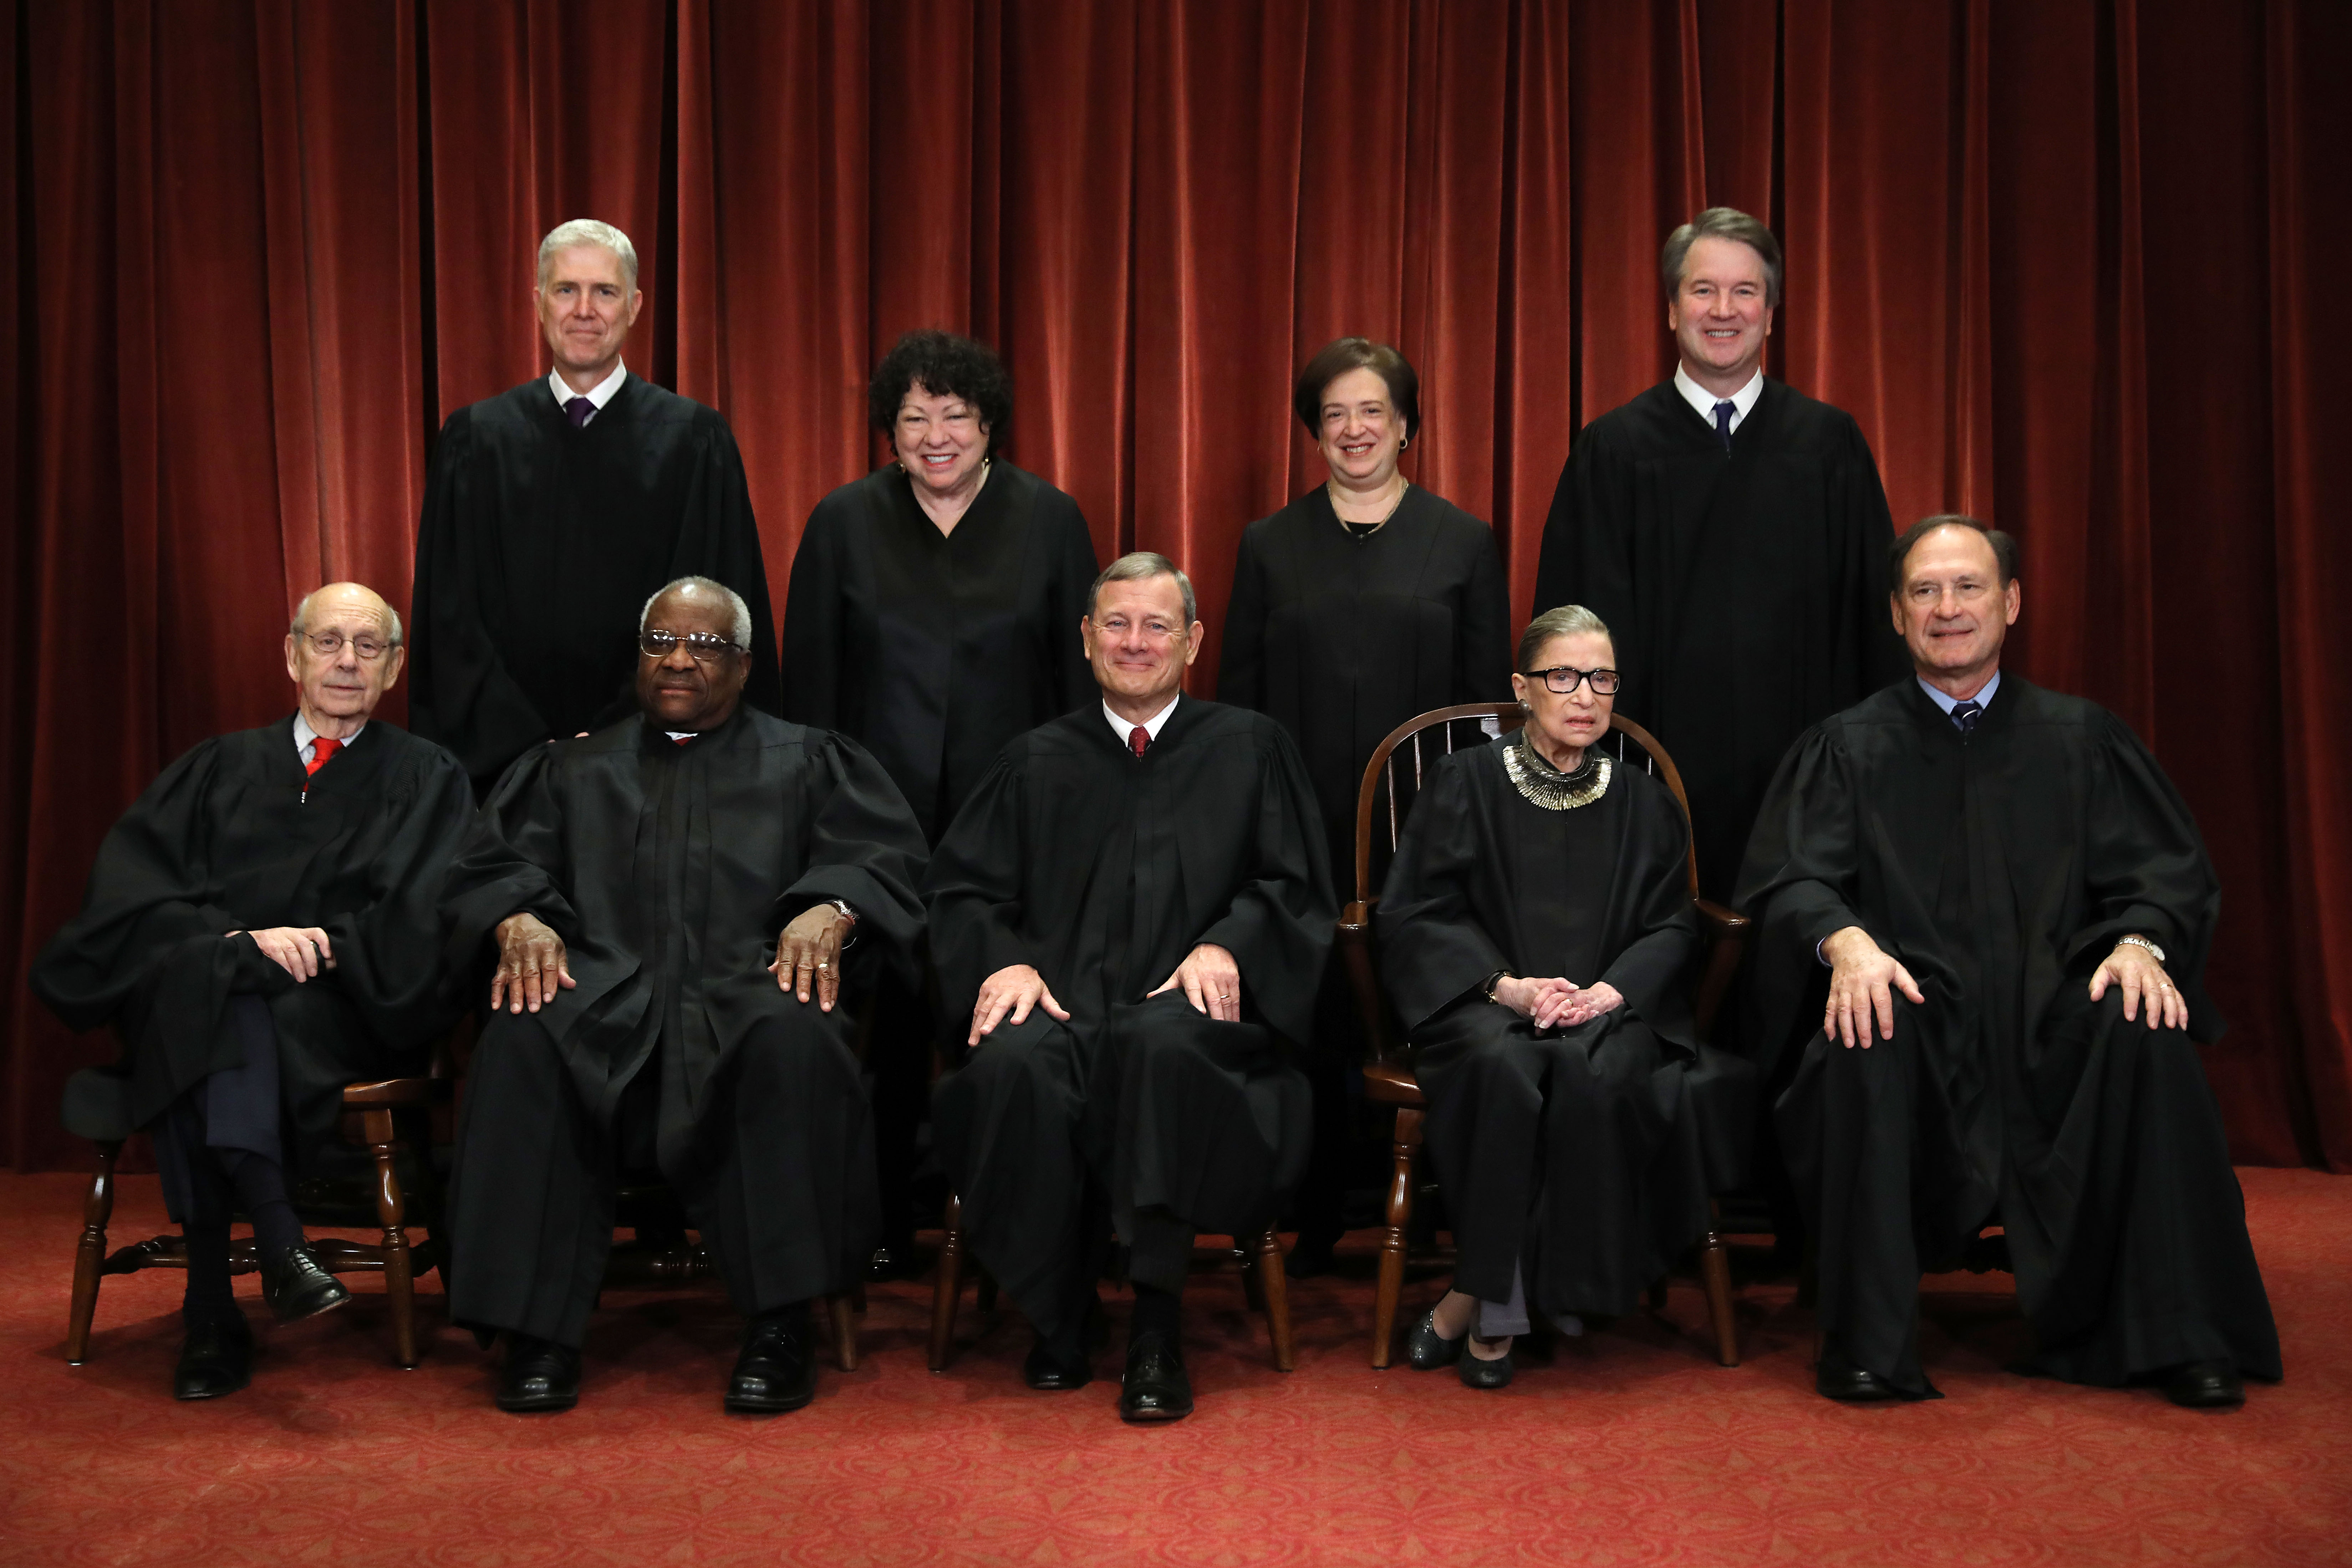 United States Supreme Court (Front L-R) Associate Justice Stephen Breyer, Associate Justice Clarence Thomas, Chief Justice John Roberts, Associate Justice Ruth Bader Ginsburg, Associate Justice Samuel Alito, Jr., (Back L-R) Associate Justice Neil Gorsuch, Associate Justice Sonia Sotomayor, Associate Justice Elena Kagan and Associate Justice Brett Kavanaugh pose for their official portrait at the in the East Conference Room at the Supreme Court building November 30, 2018 in Washington, DC. Earlier this month, Chief Justice Roberts publicly defended the independence and integrity of the federal judiciary against President Trump after he called a judge who had ruled against his administration’s asylum policy “an Obama judge.” “We do not have Obama judges or Trump judges, Bush judges or Clinton judges,” Roberts said in a statement. “What we have is an extraordinary group of dedicated judges doing their level best to do equal right to those appearing before them. That independent judiciary is something we should all be thankful for.” (Photo by Chip Somodevilla/Getty Images)